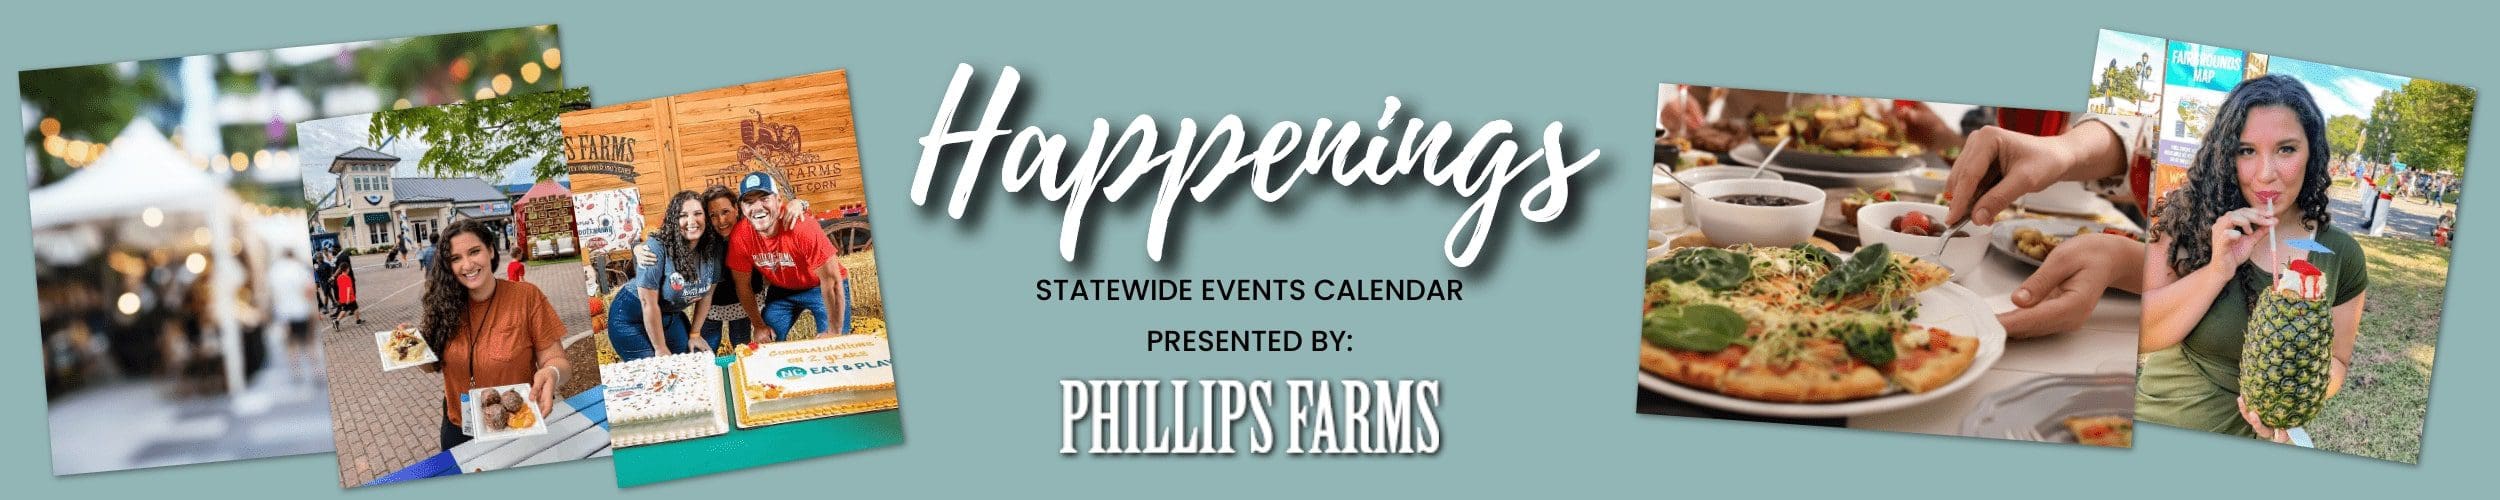 NC Events Calendar presented by Phillips Farms Farmers Market